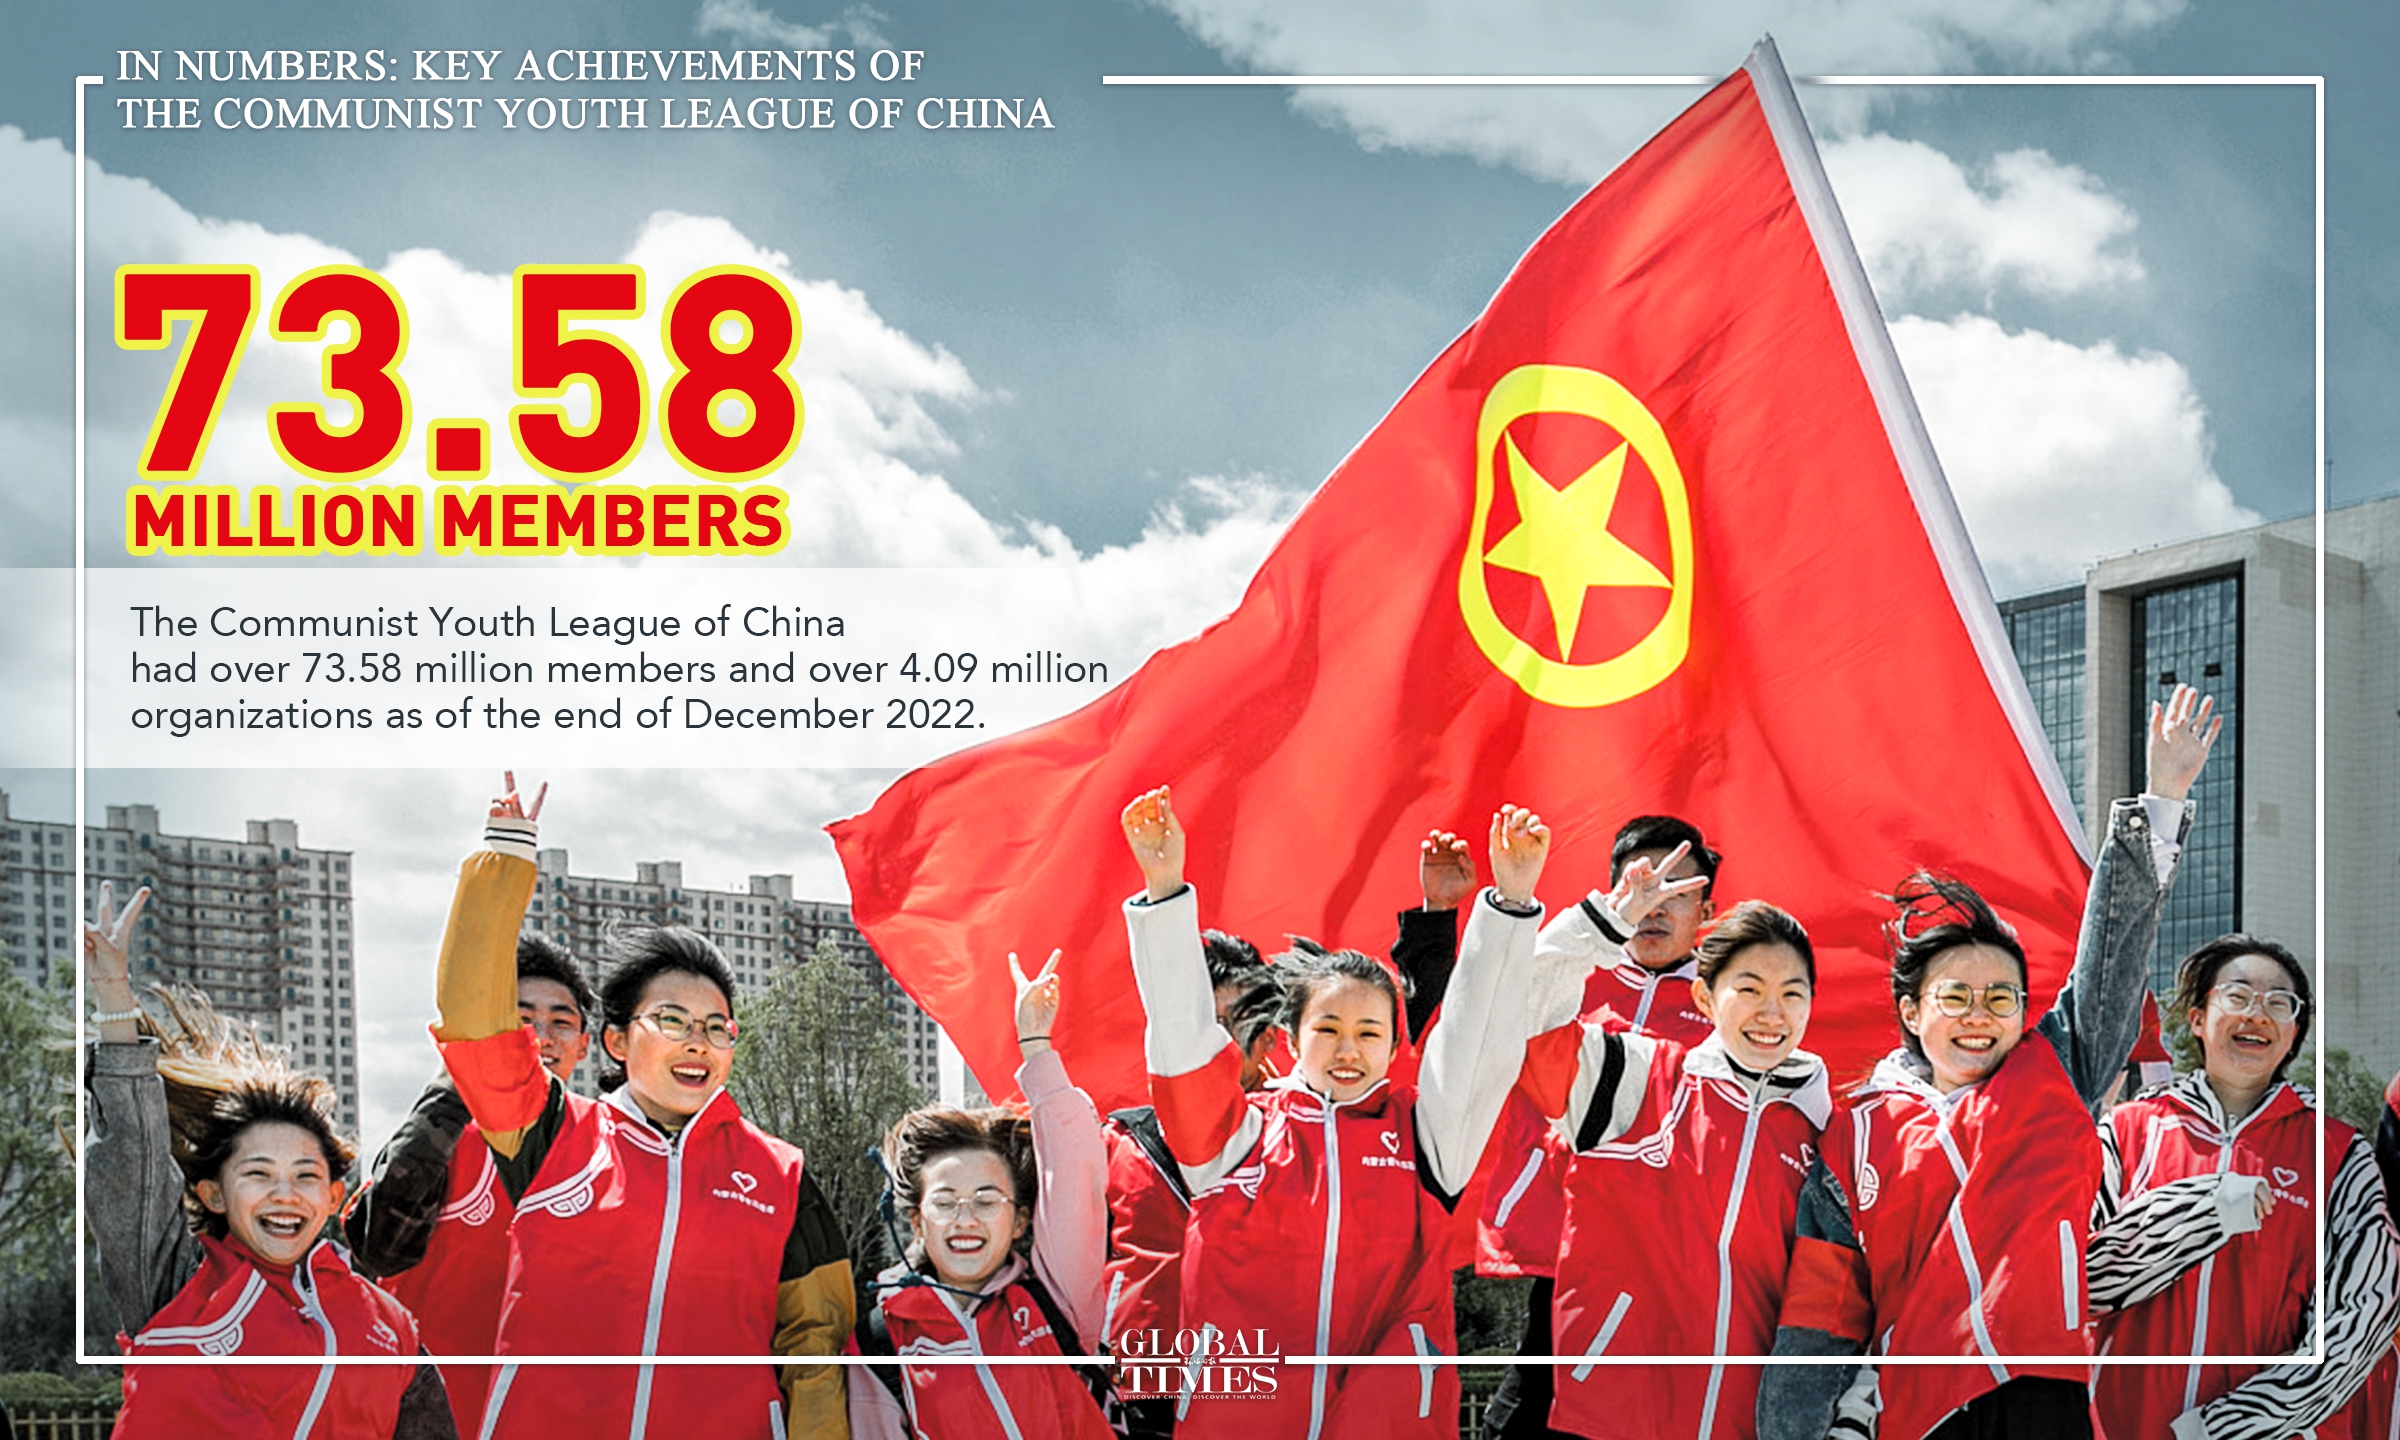 In numbers: key achievements of the Communist Youth League of China